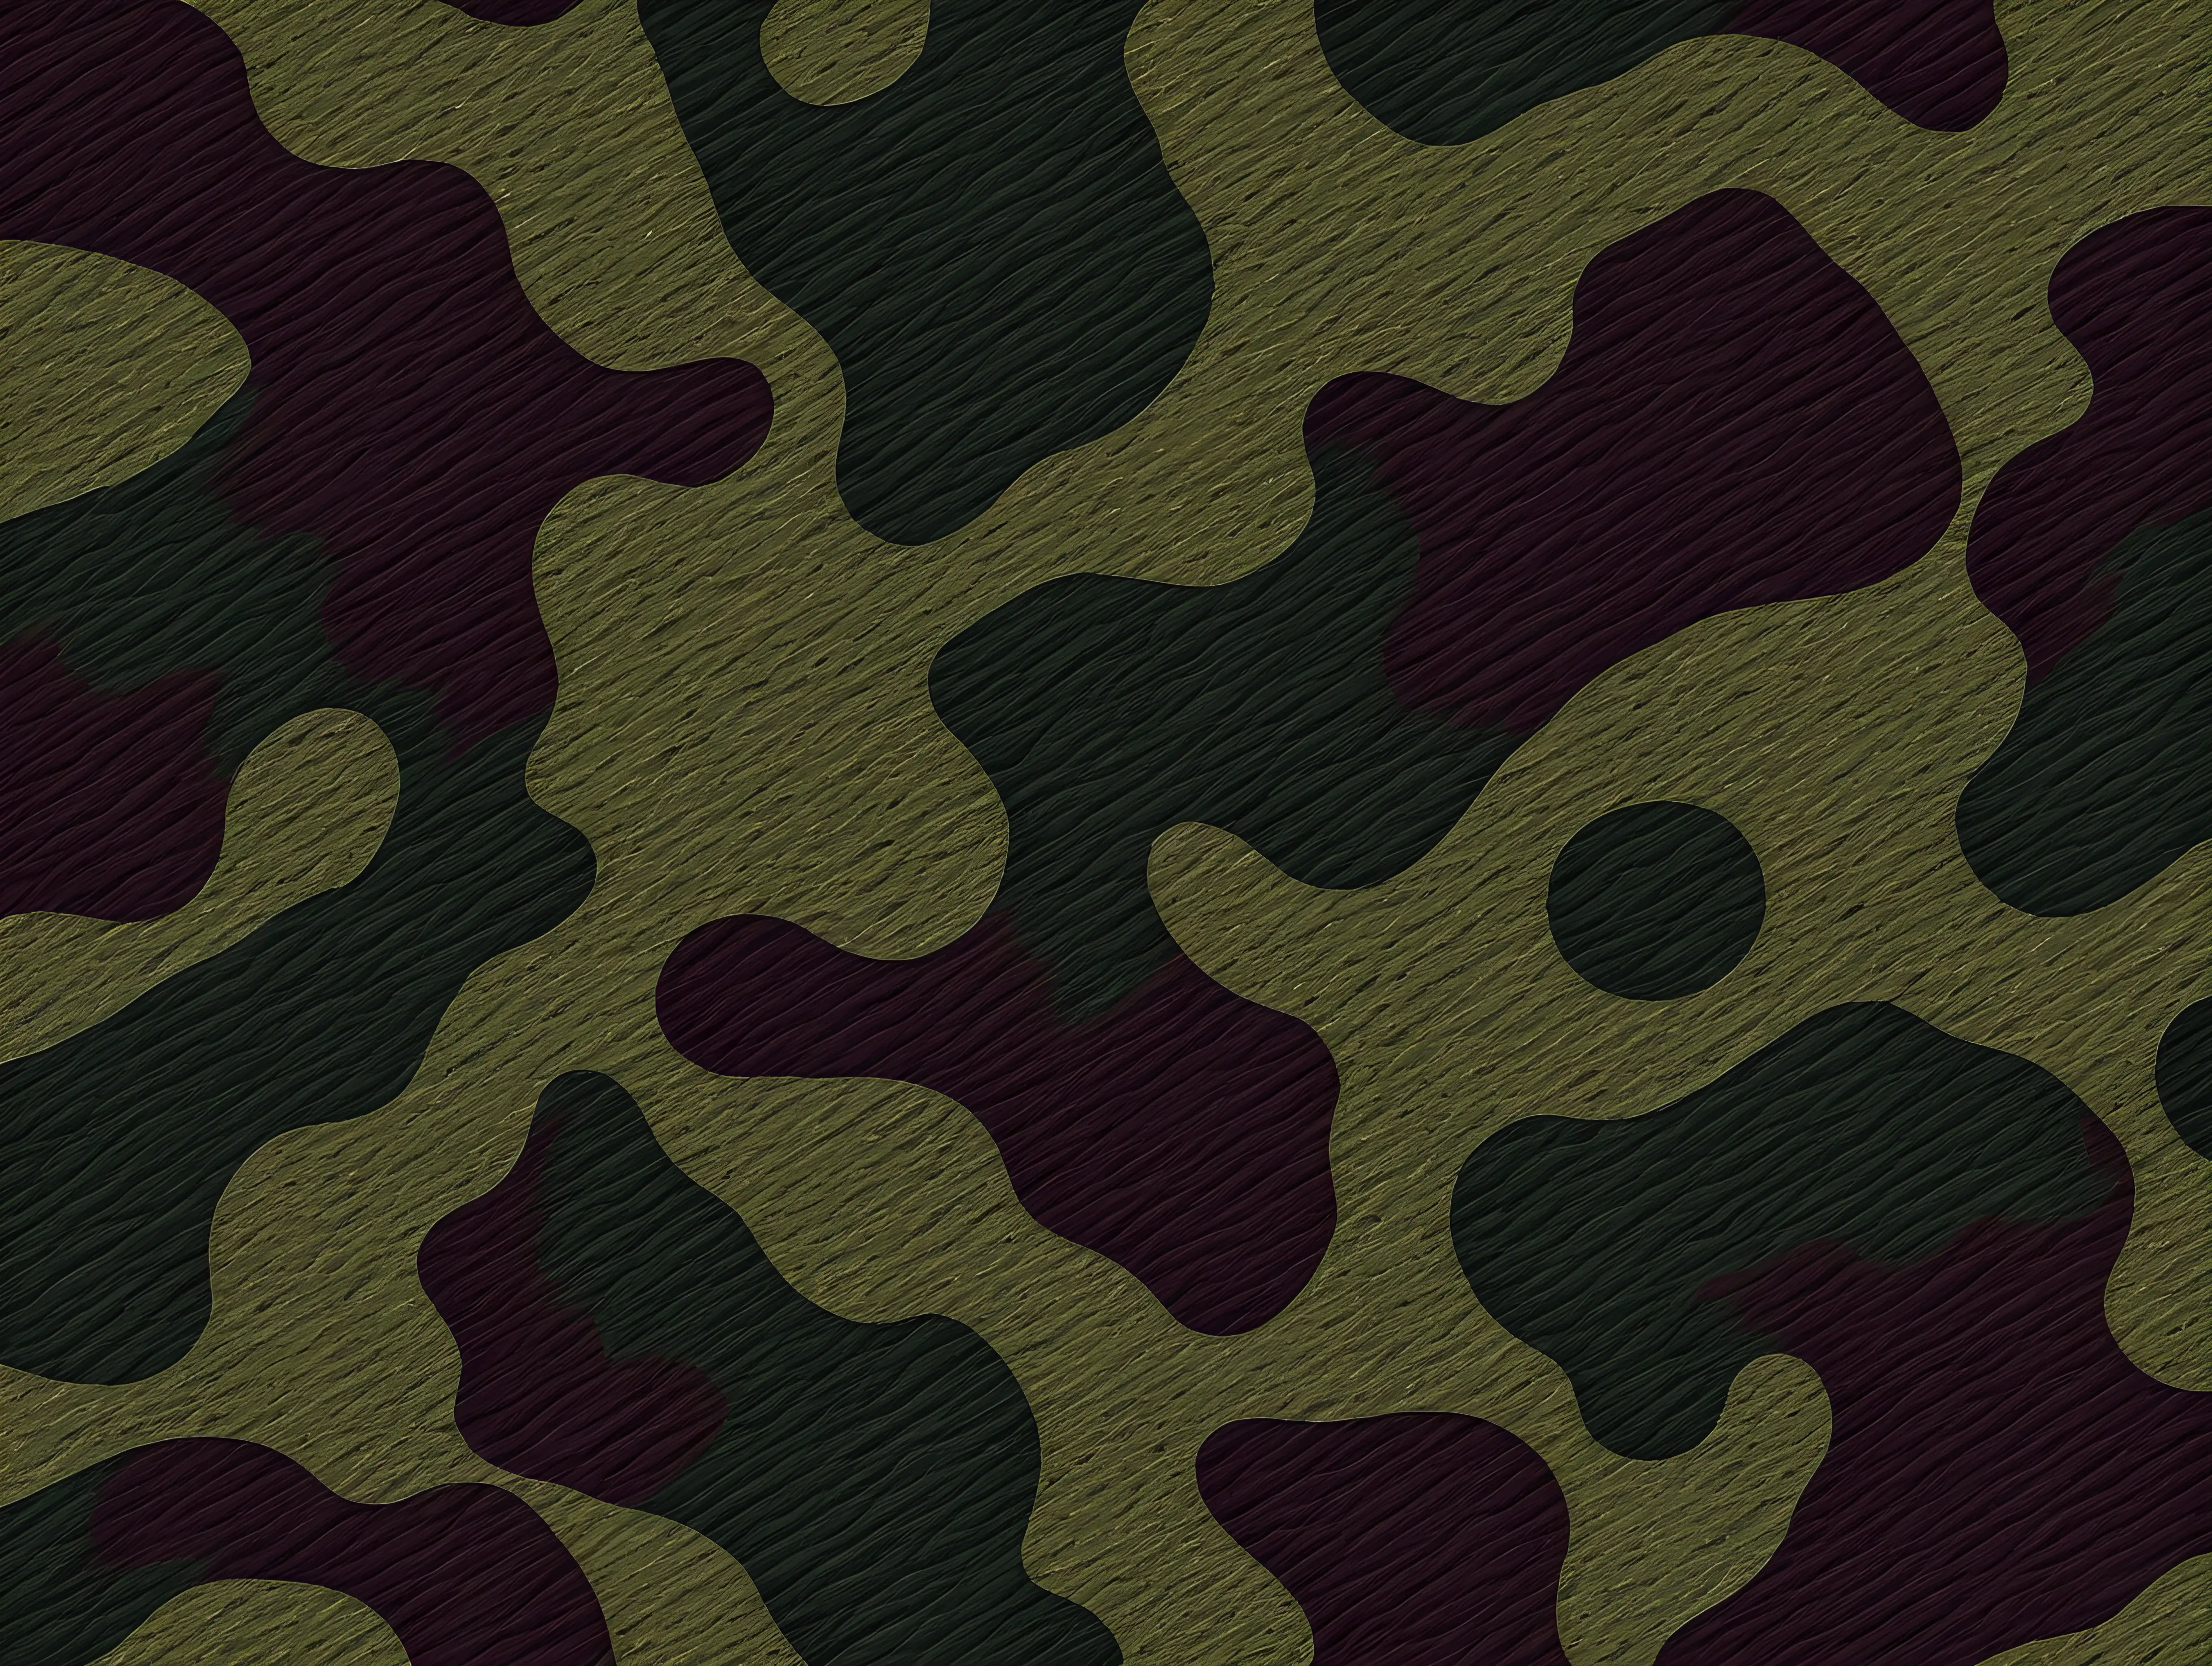 Vibrant HighQuality Military Camouflage Texture Design